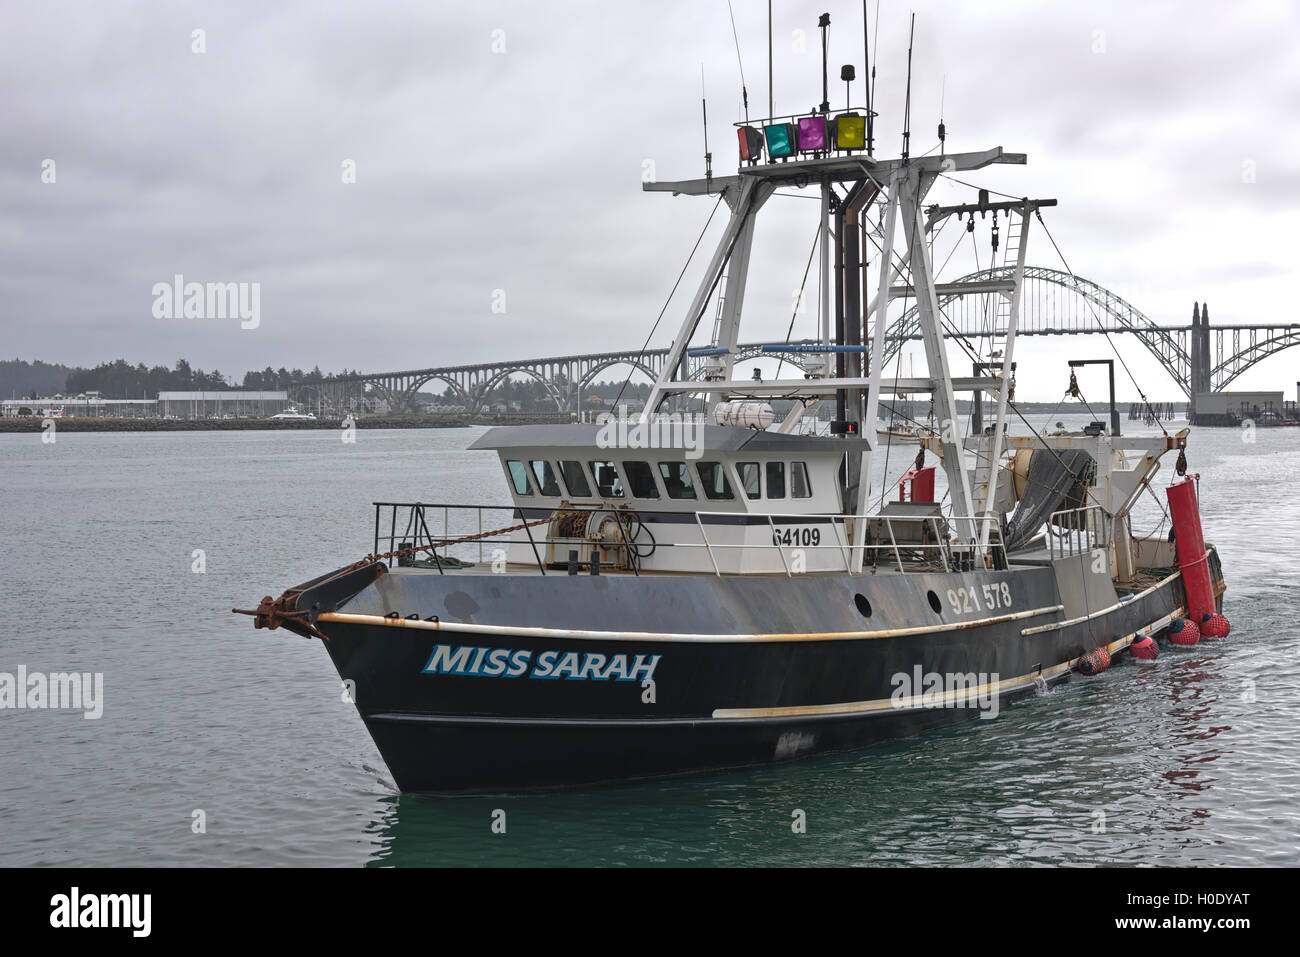 Fishing vessel returning to port after a days work Newport Oregon. Stock Photo